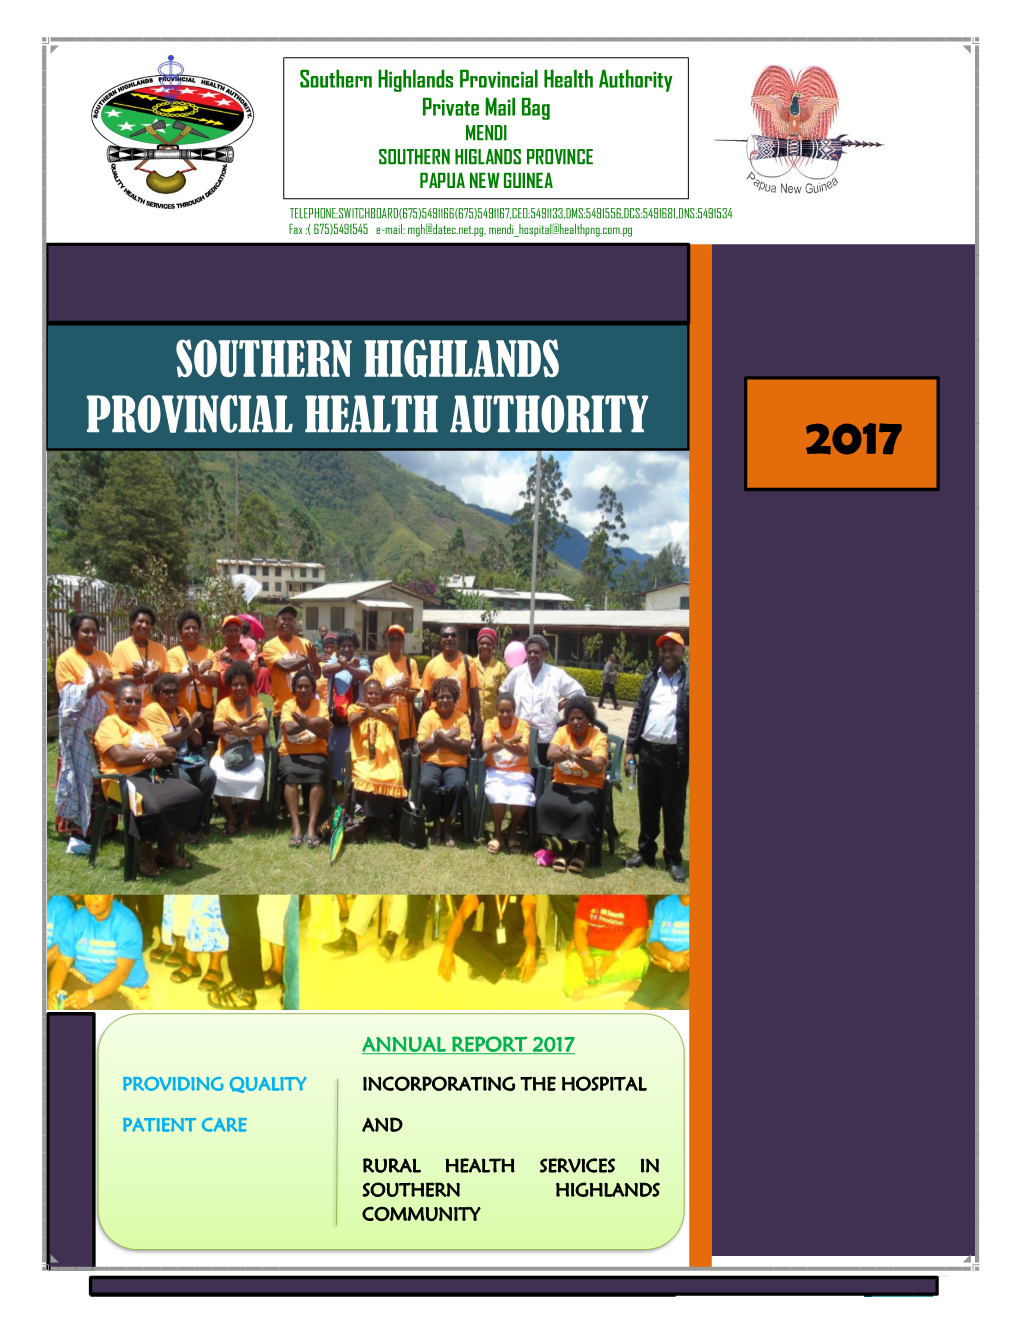 Southern Highlands Provincial Health Authority Private Mail Bag MENDI SOUTHERN HIGLANDS PROVINCE PAPUA NEW GUINEA